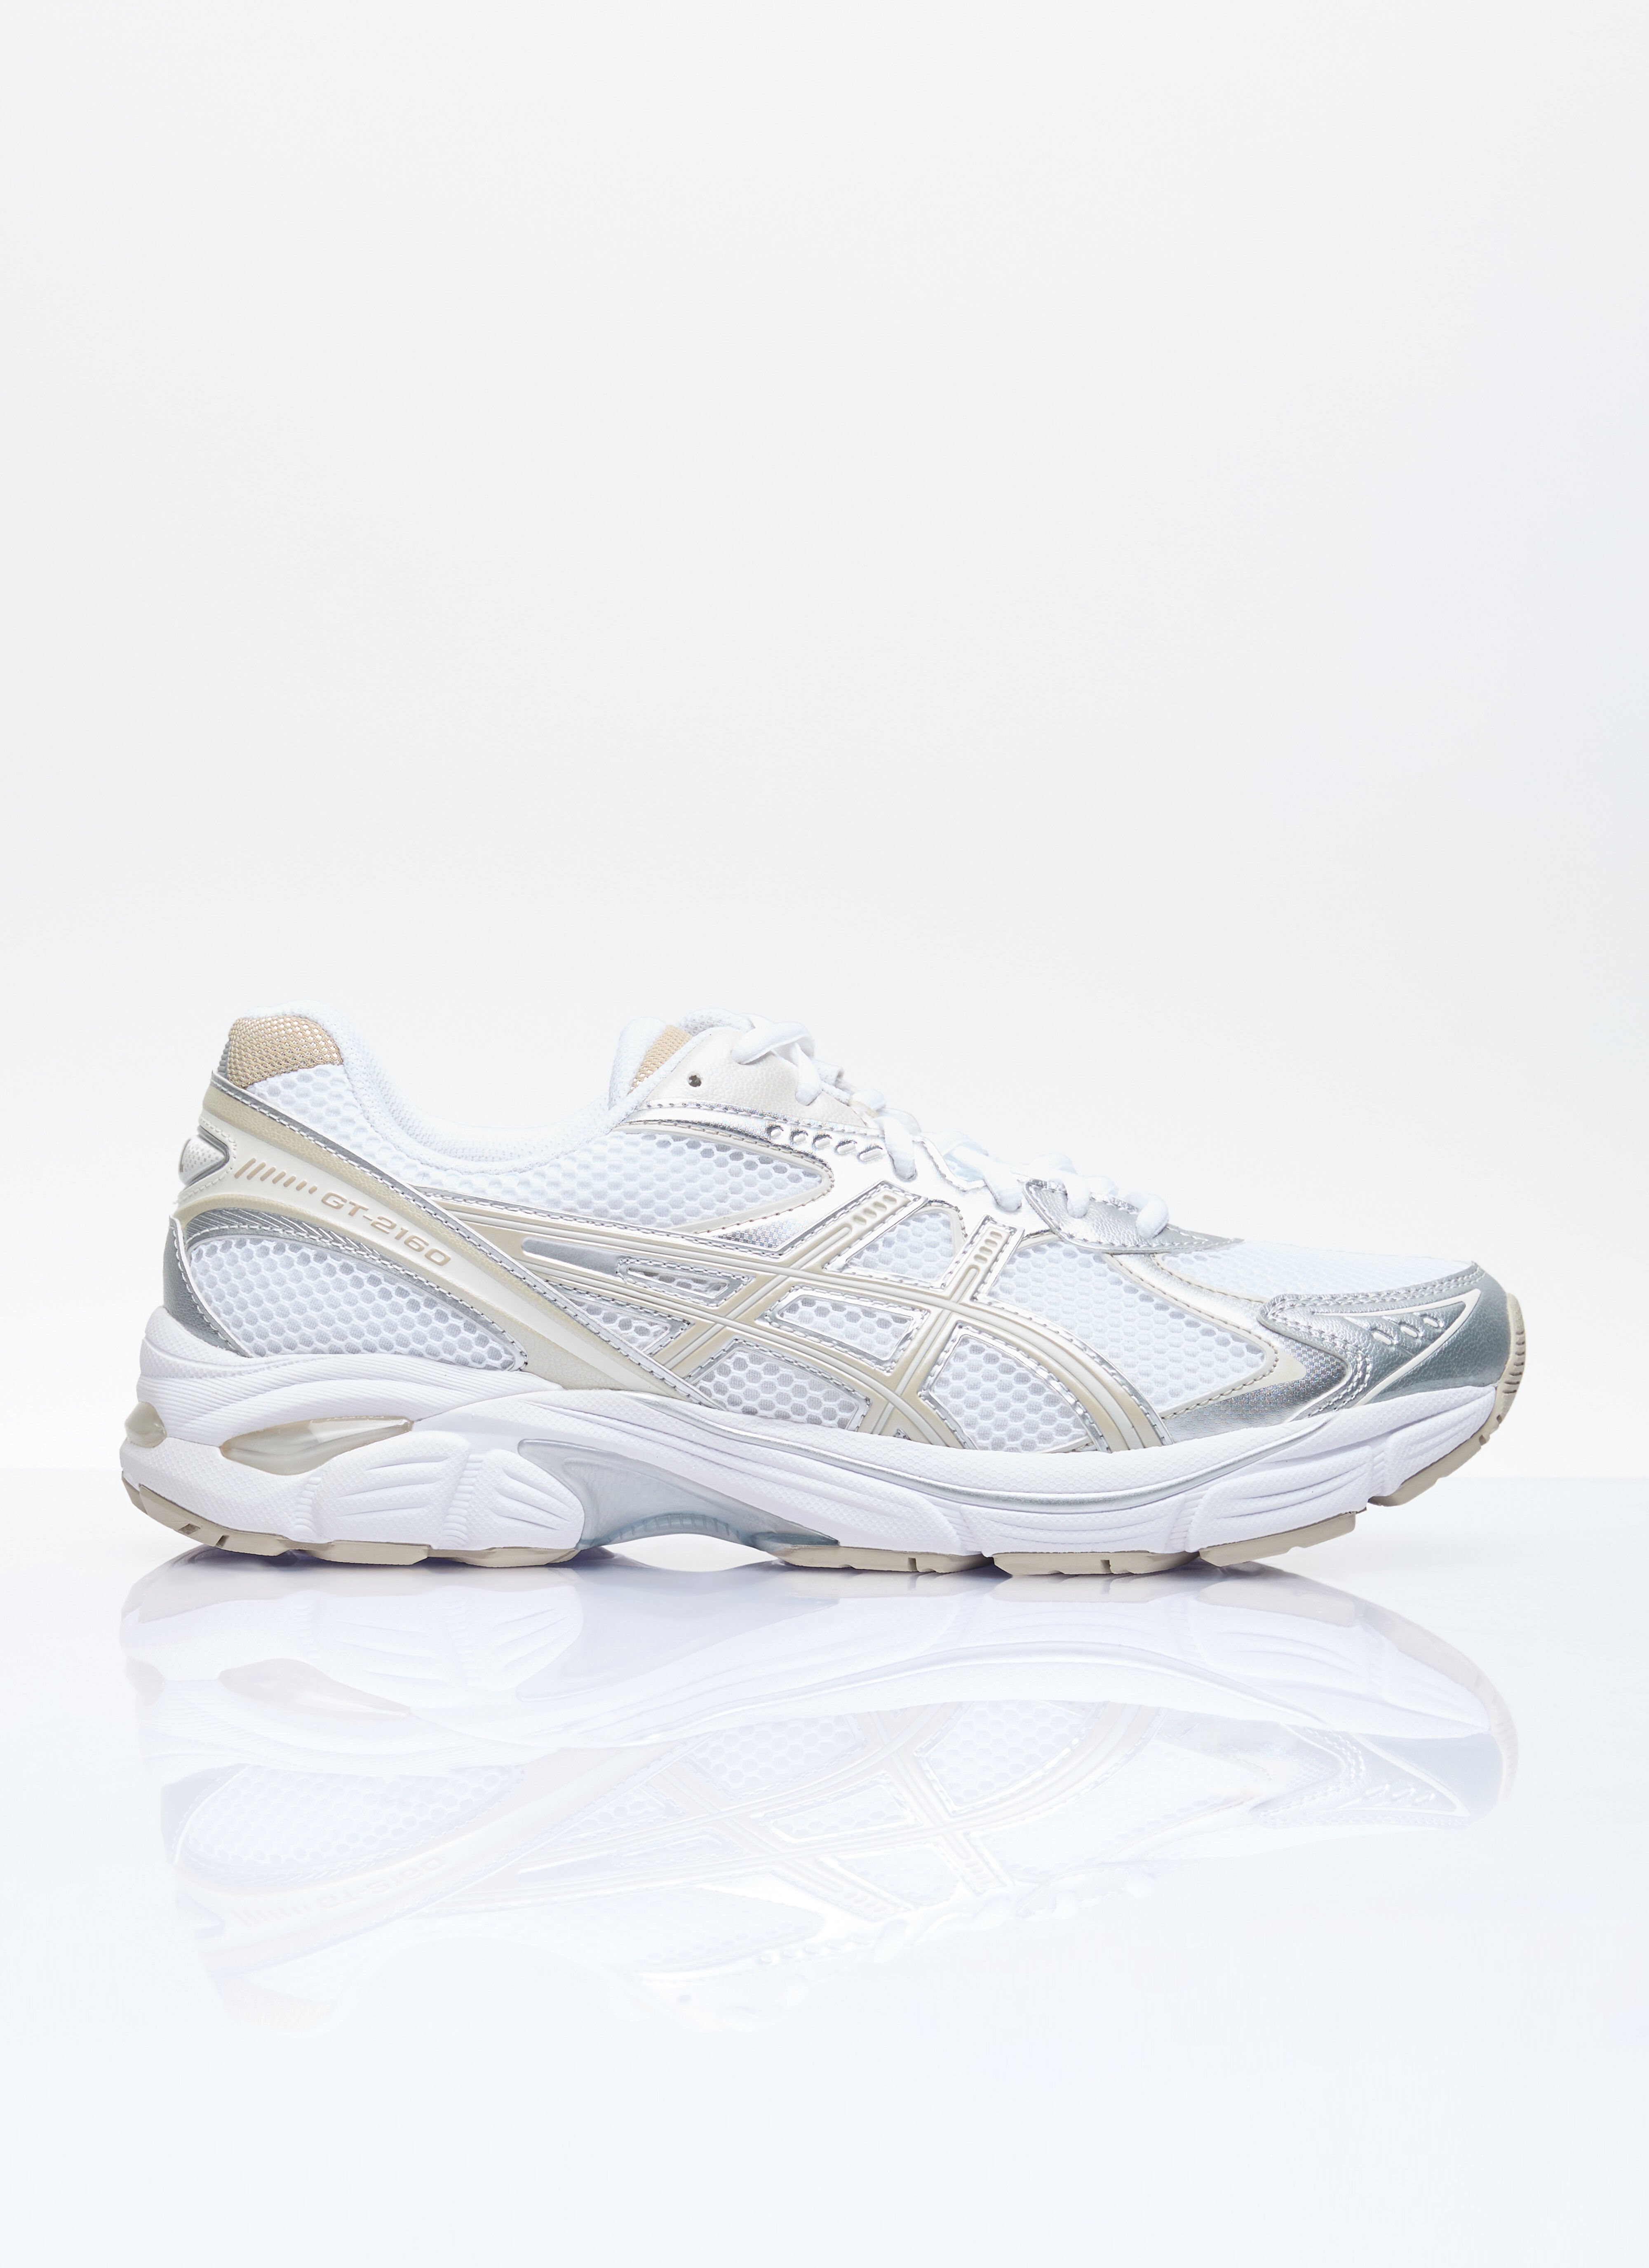 Asics x emmi GT-2160 Sneakers Silver axe0257001